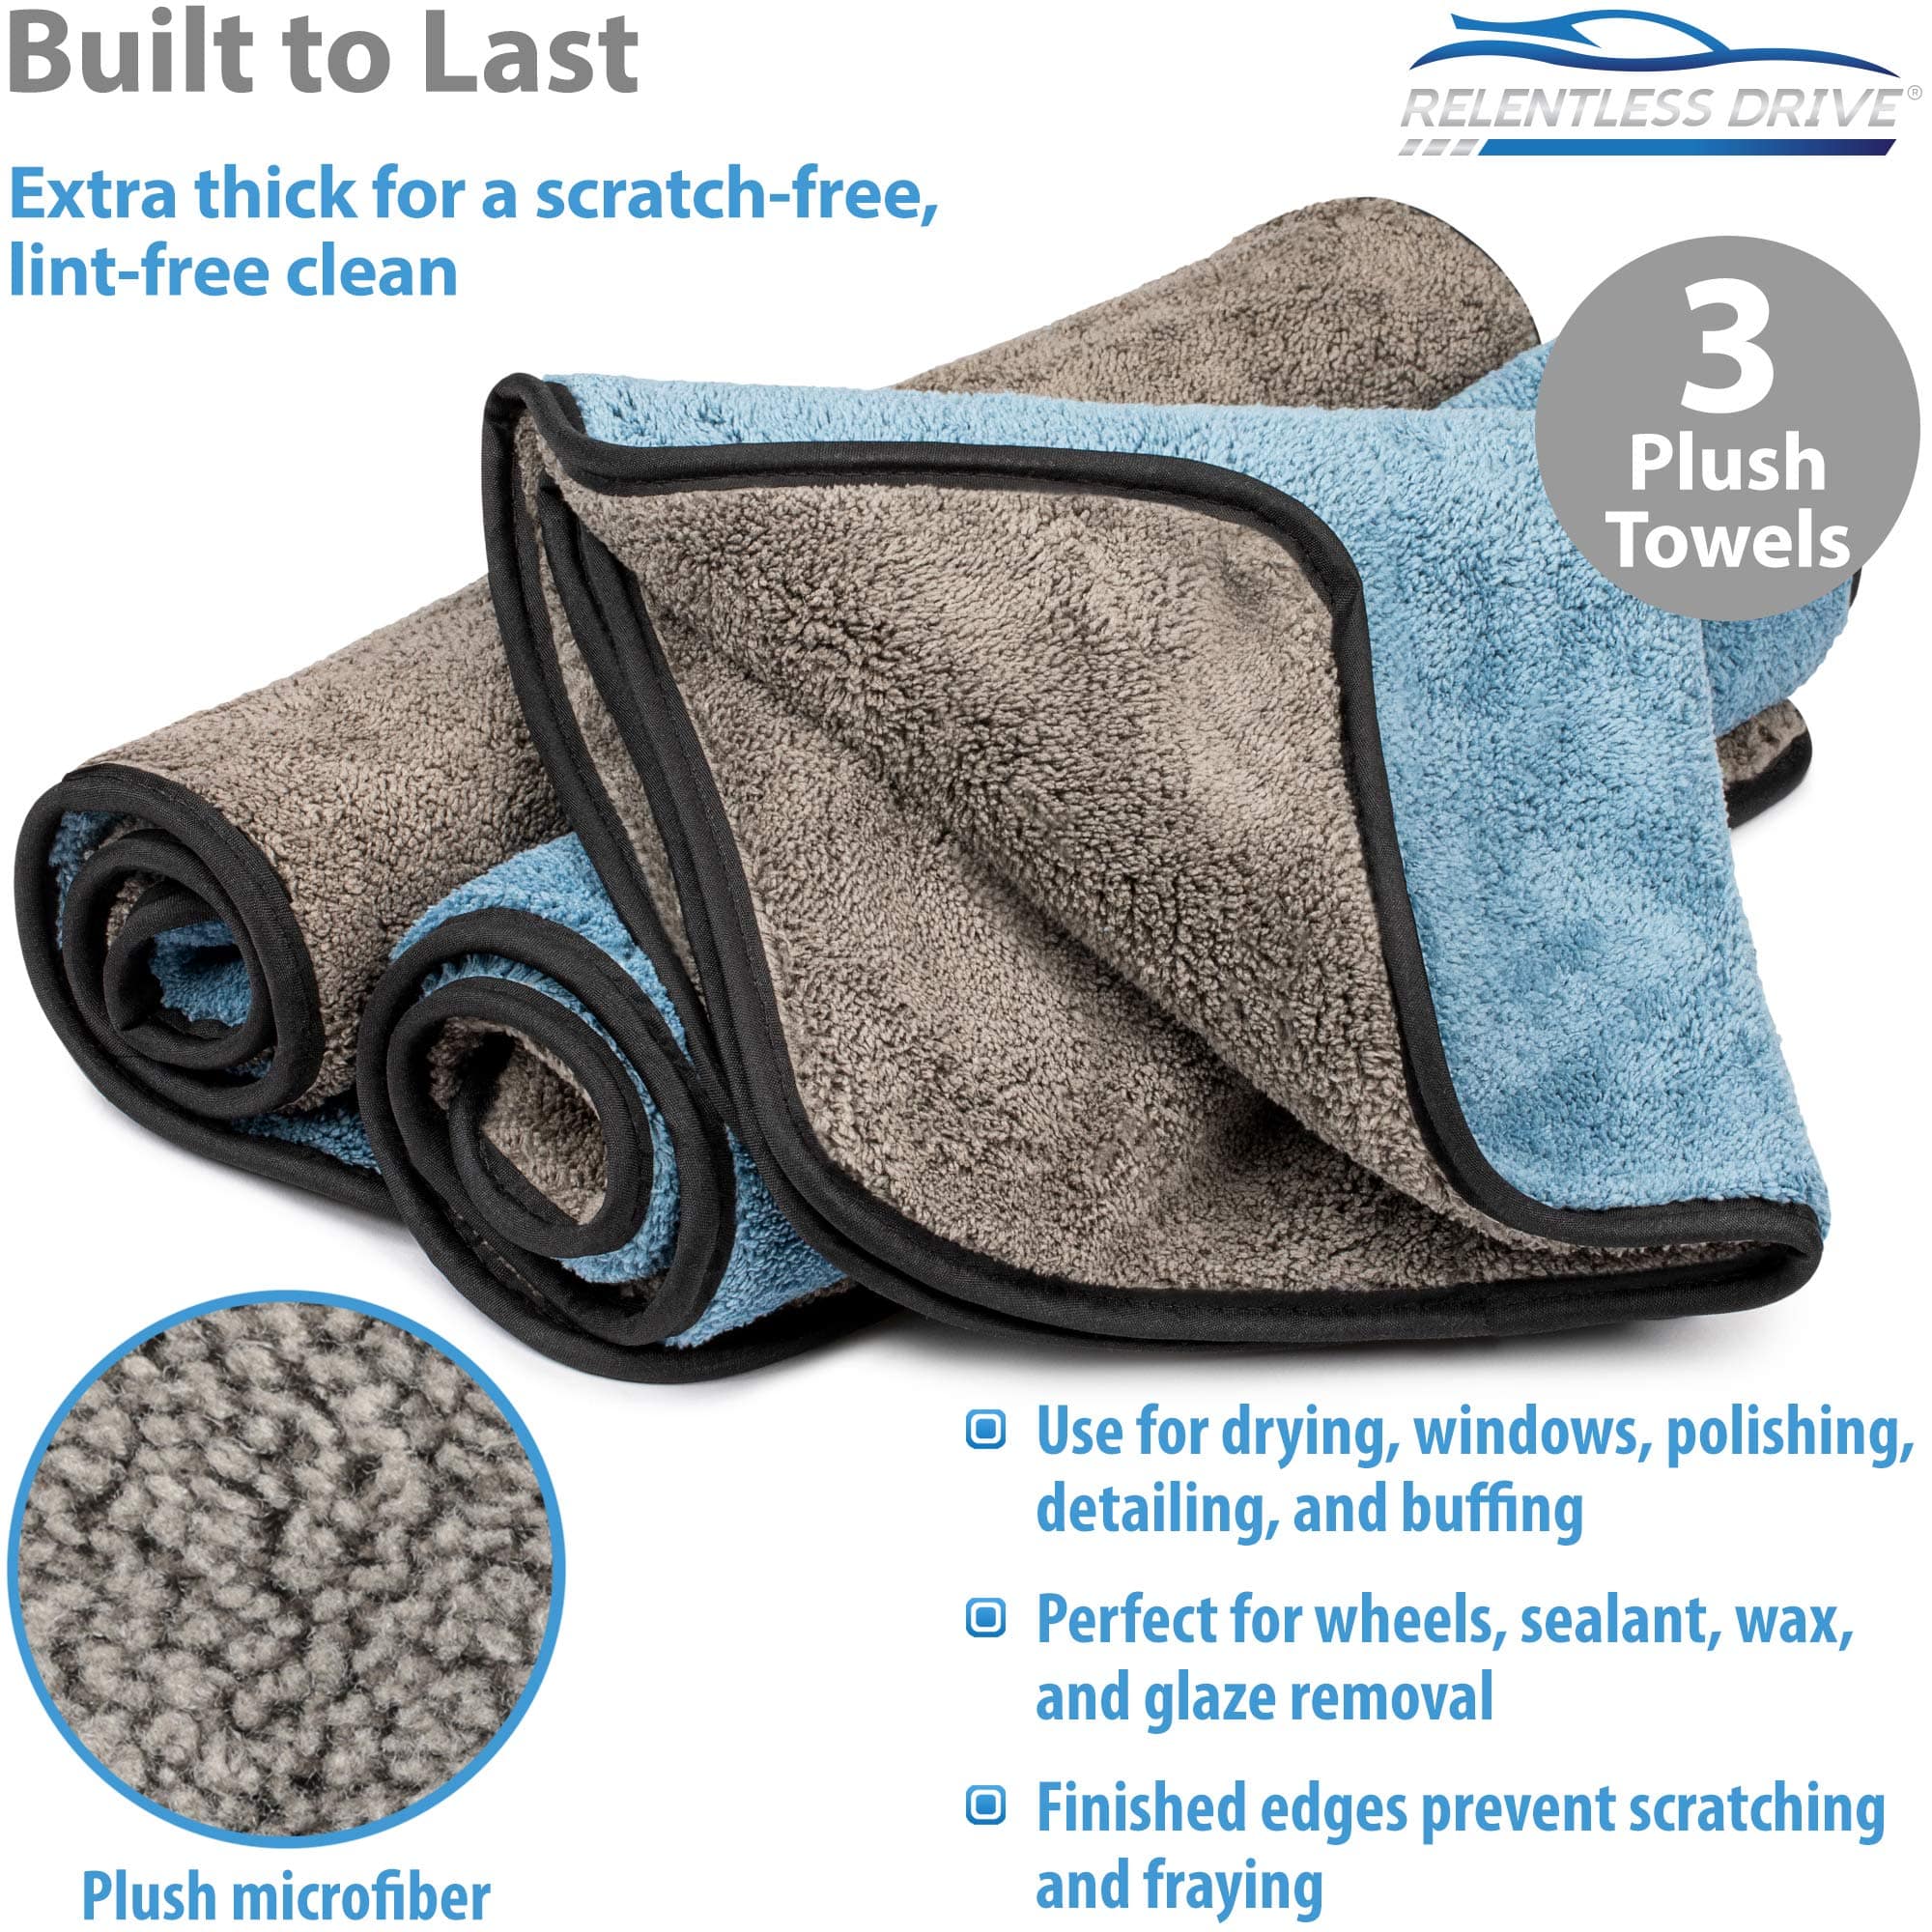 https://relentless-drive.com/cdn/shop/products/microfiber-towels-for-cars-15-x-17-gsm-600-3-pack-lint-and-scratch-free-car-drying-towel-extra-thick-microfiber-car-towels-drying-towels-for-cars-trucks-suv-rv-boat-relentless-drive-8_8d5085d8-1332-4675-b3aa-fce6aeaeb049_1024x1024@2x.jpg?v=1679435201